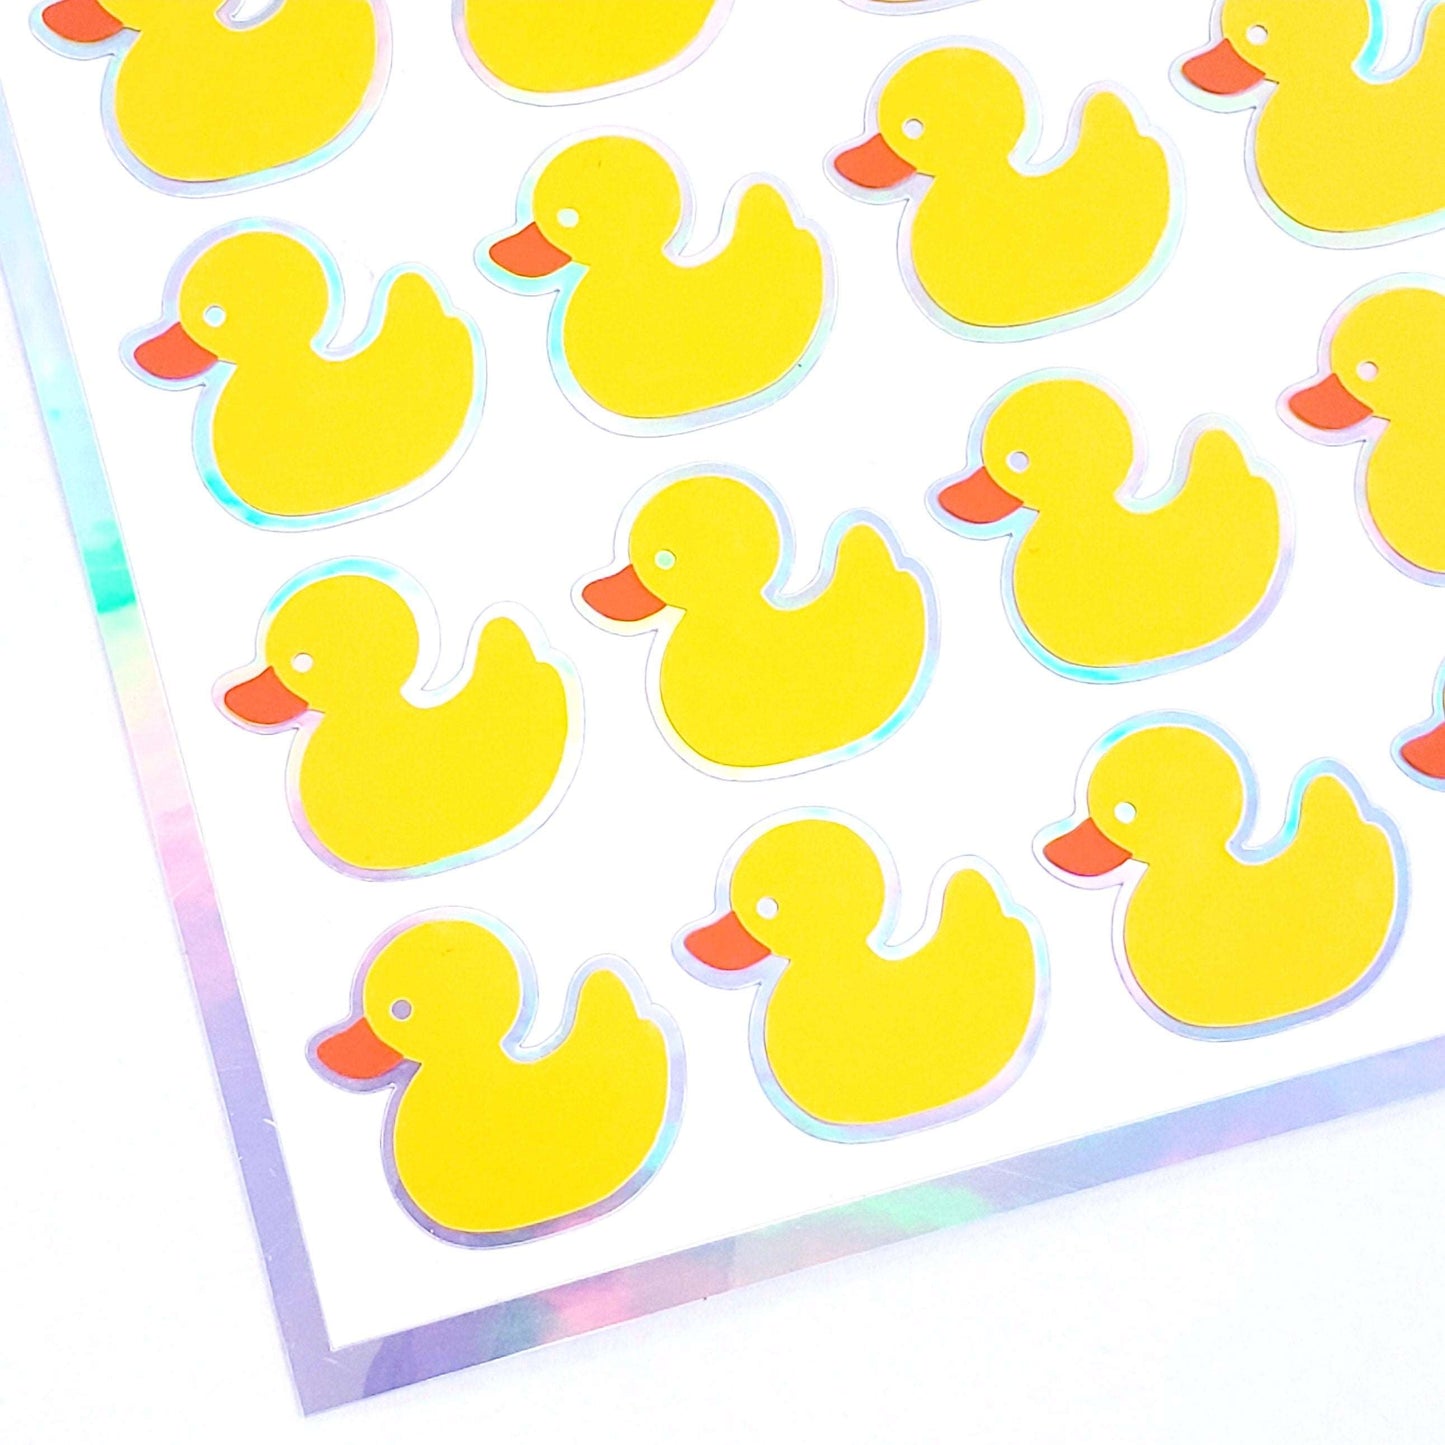 Rubber Ducky Stickers, set of 35 small duck vinyl decals. Stickers for scrapbook pages, journals, baby bath time schedule and goal charts.